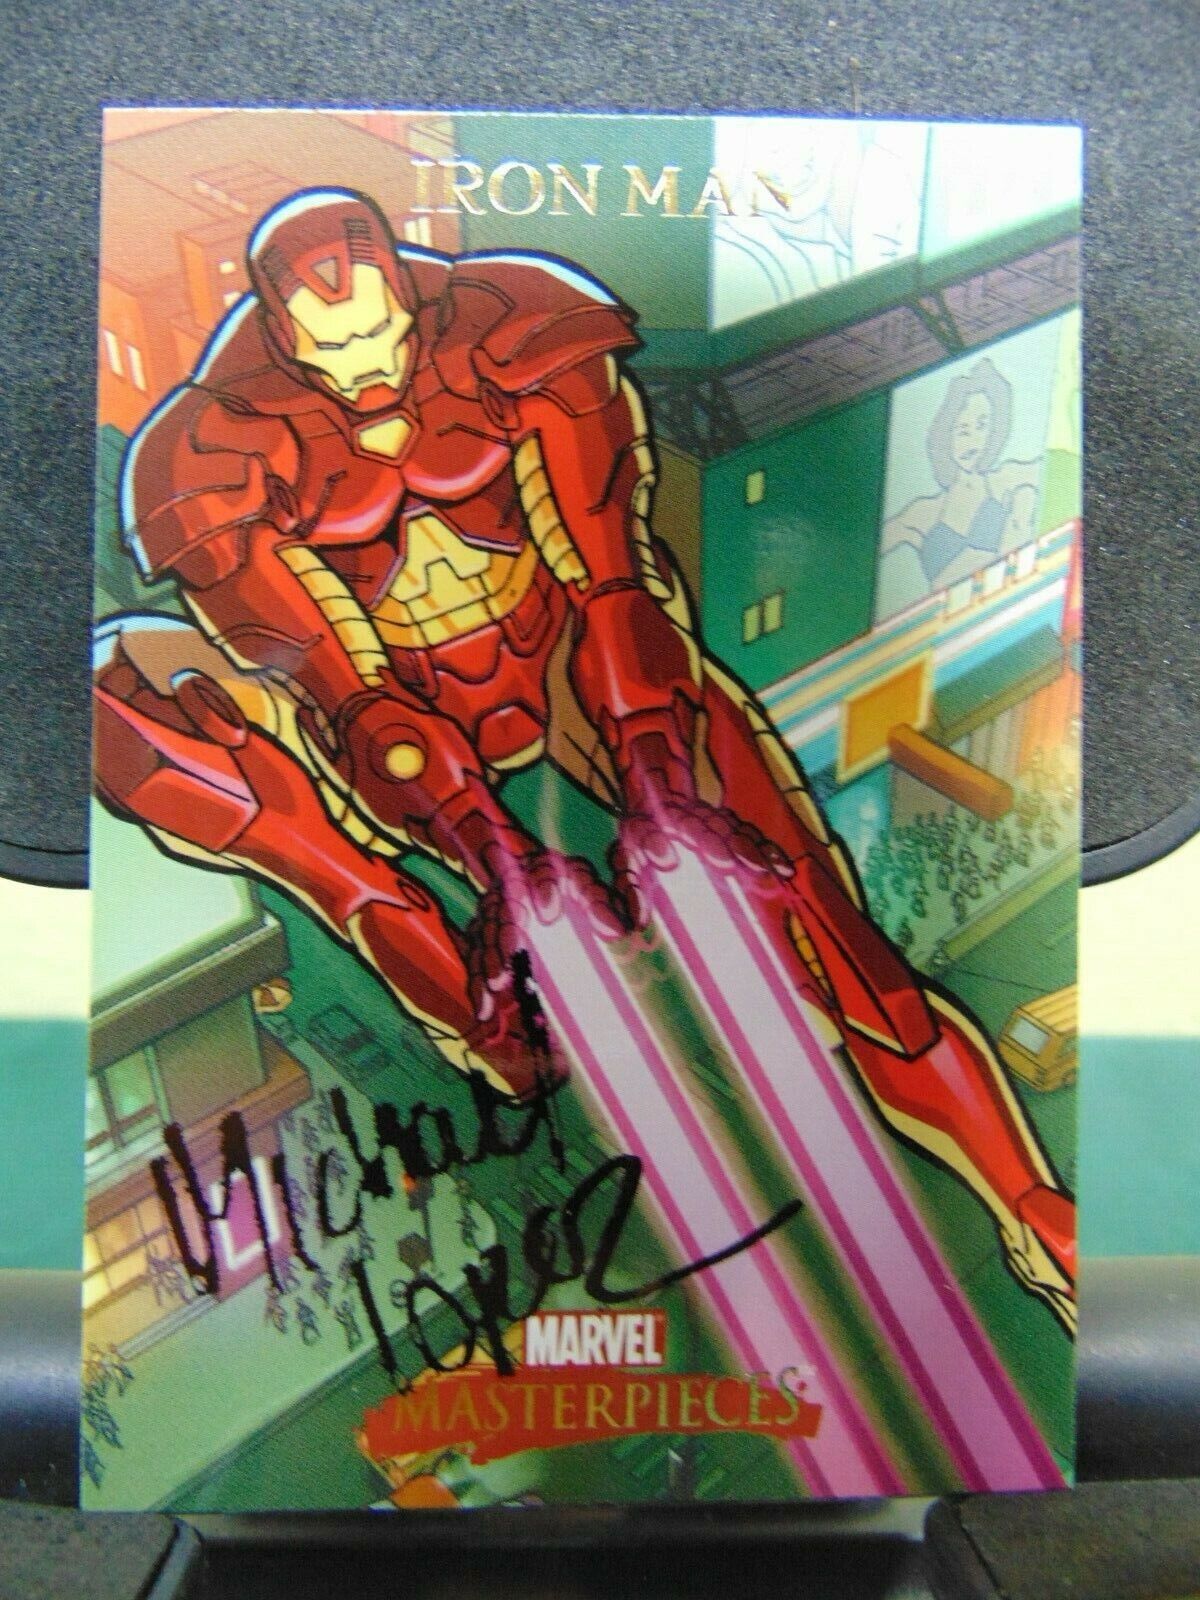 2007 Upper Deck Marvel Masterpieces Card #43 IRON MAN SIGNED MICHAEL TURNER